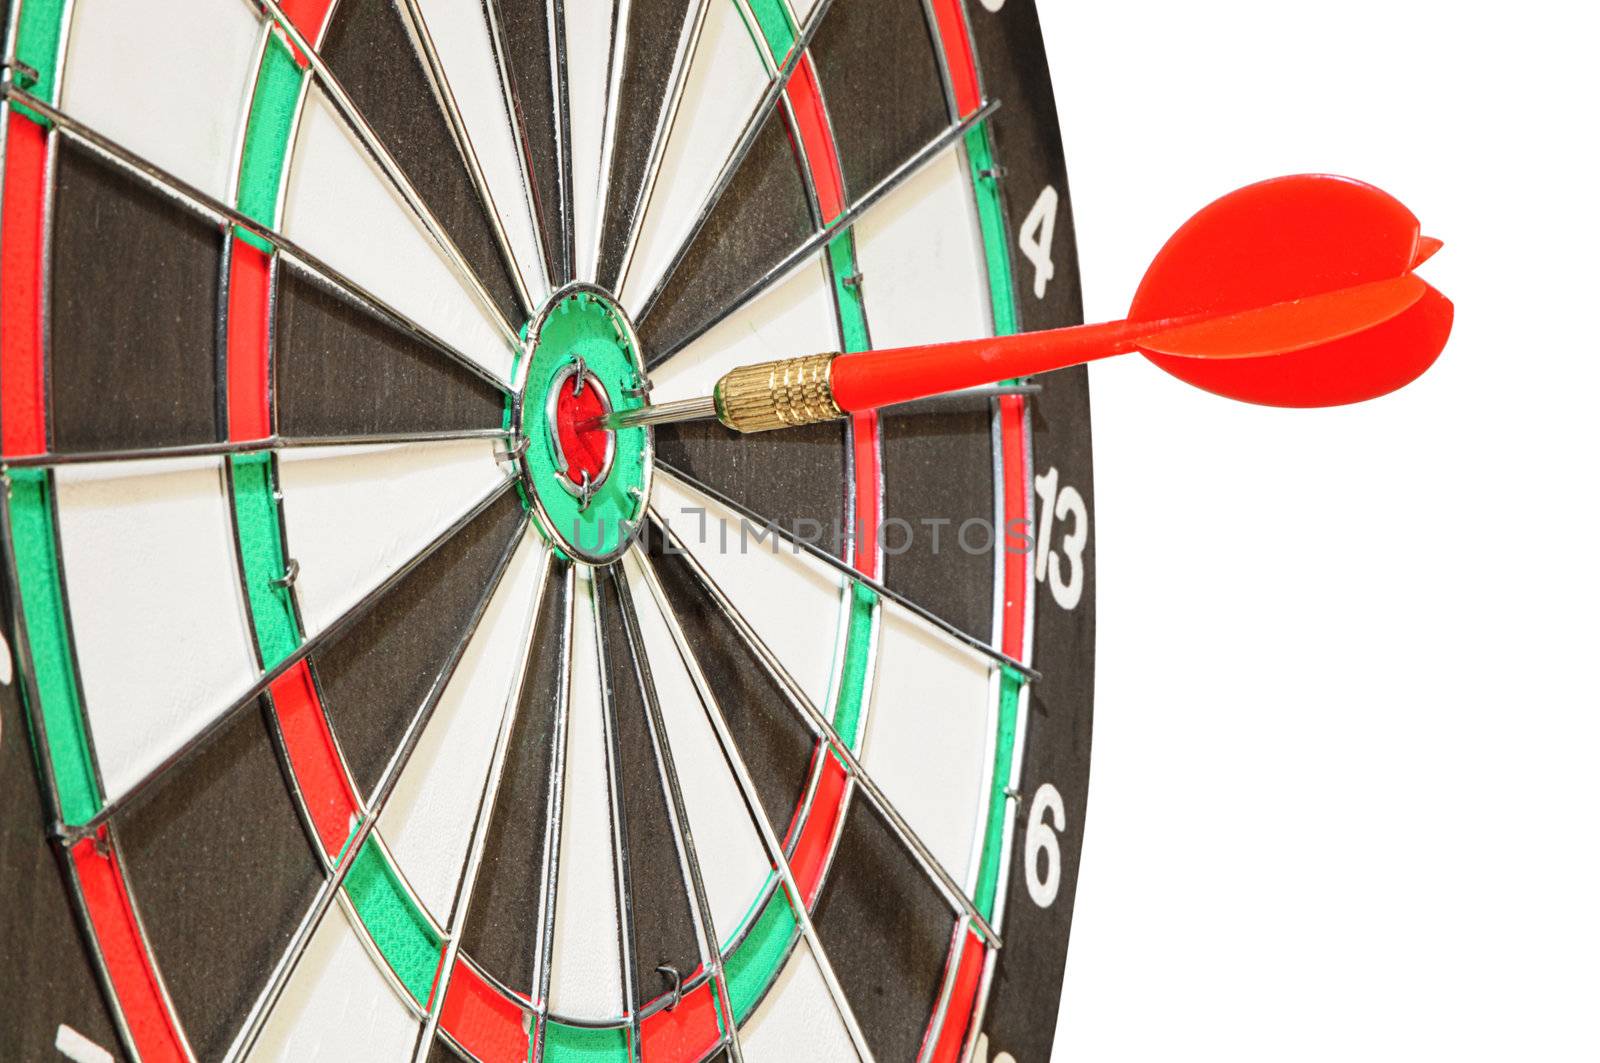 arrow darts in a center a target by dyoma